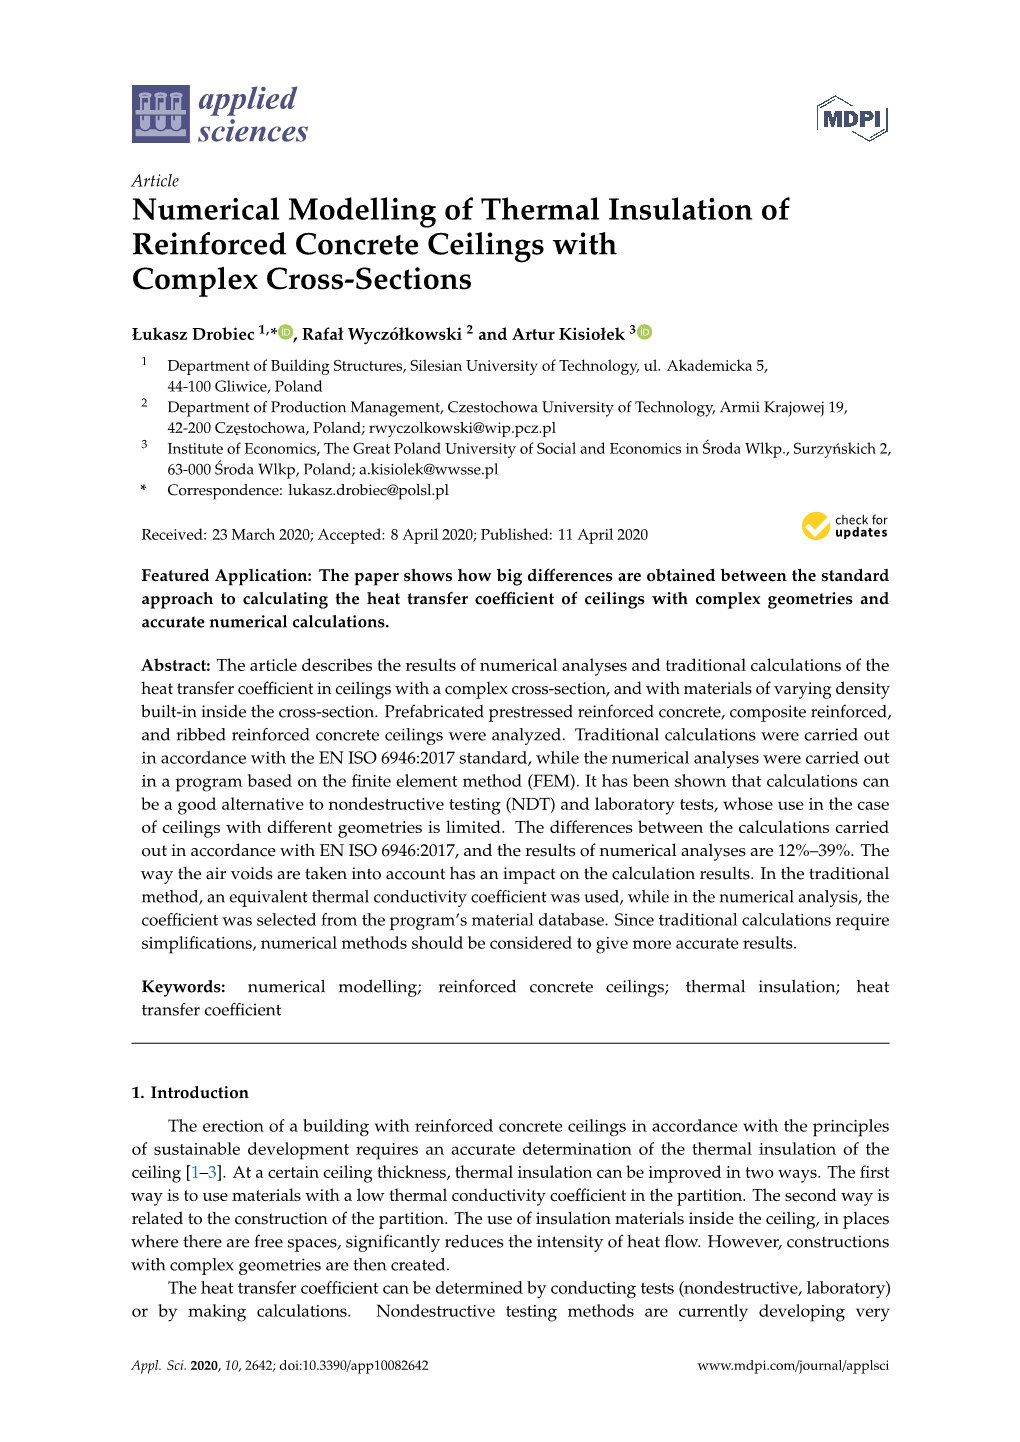 Numerical Modelling of Thermal Insulation of Reinforced Concrete Ceilings with Complex Cross-Sections